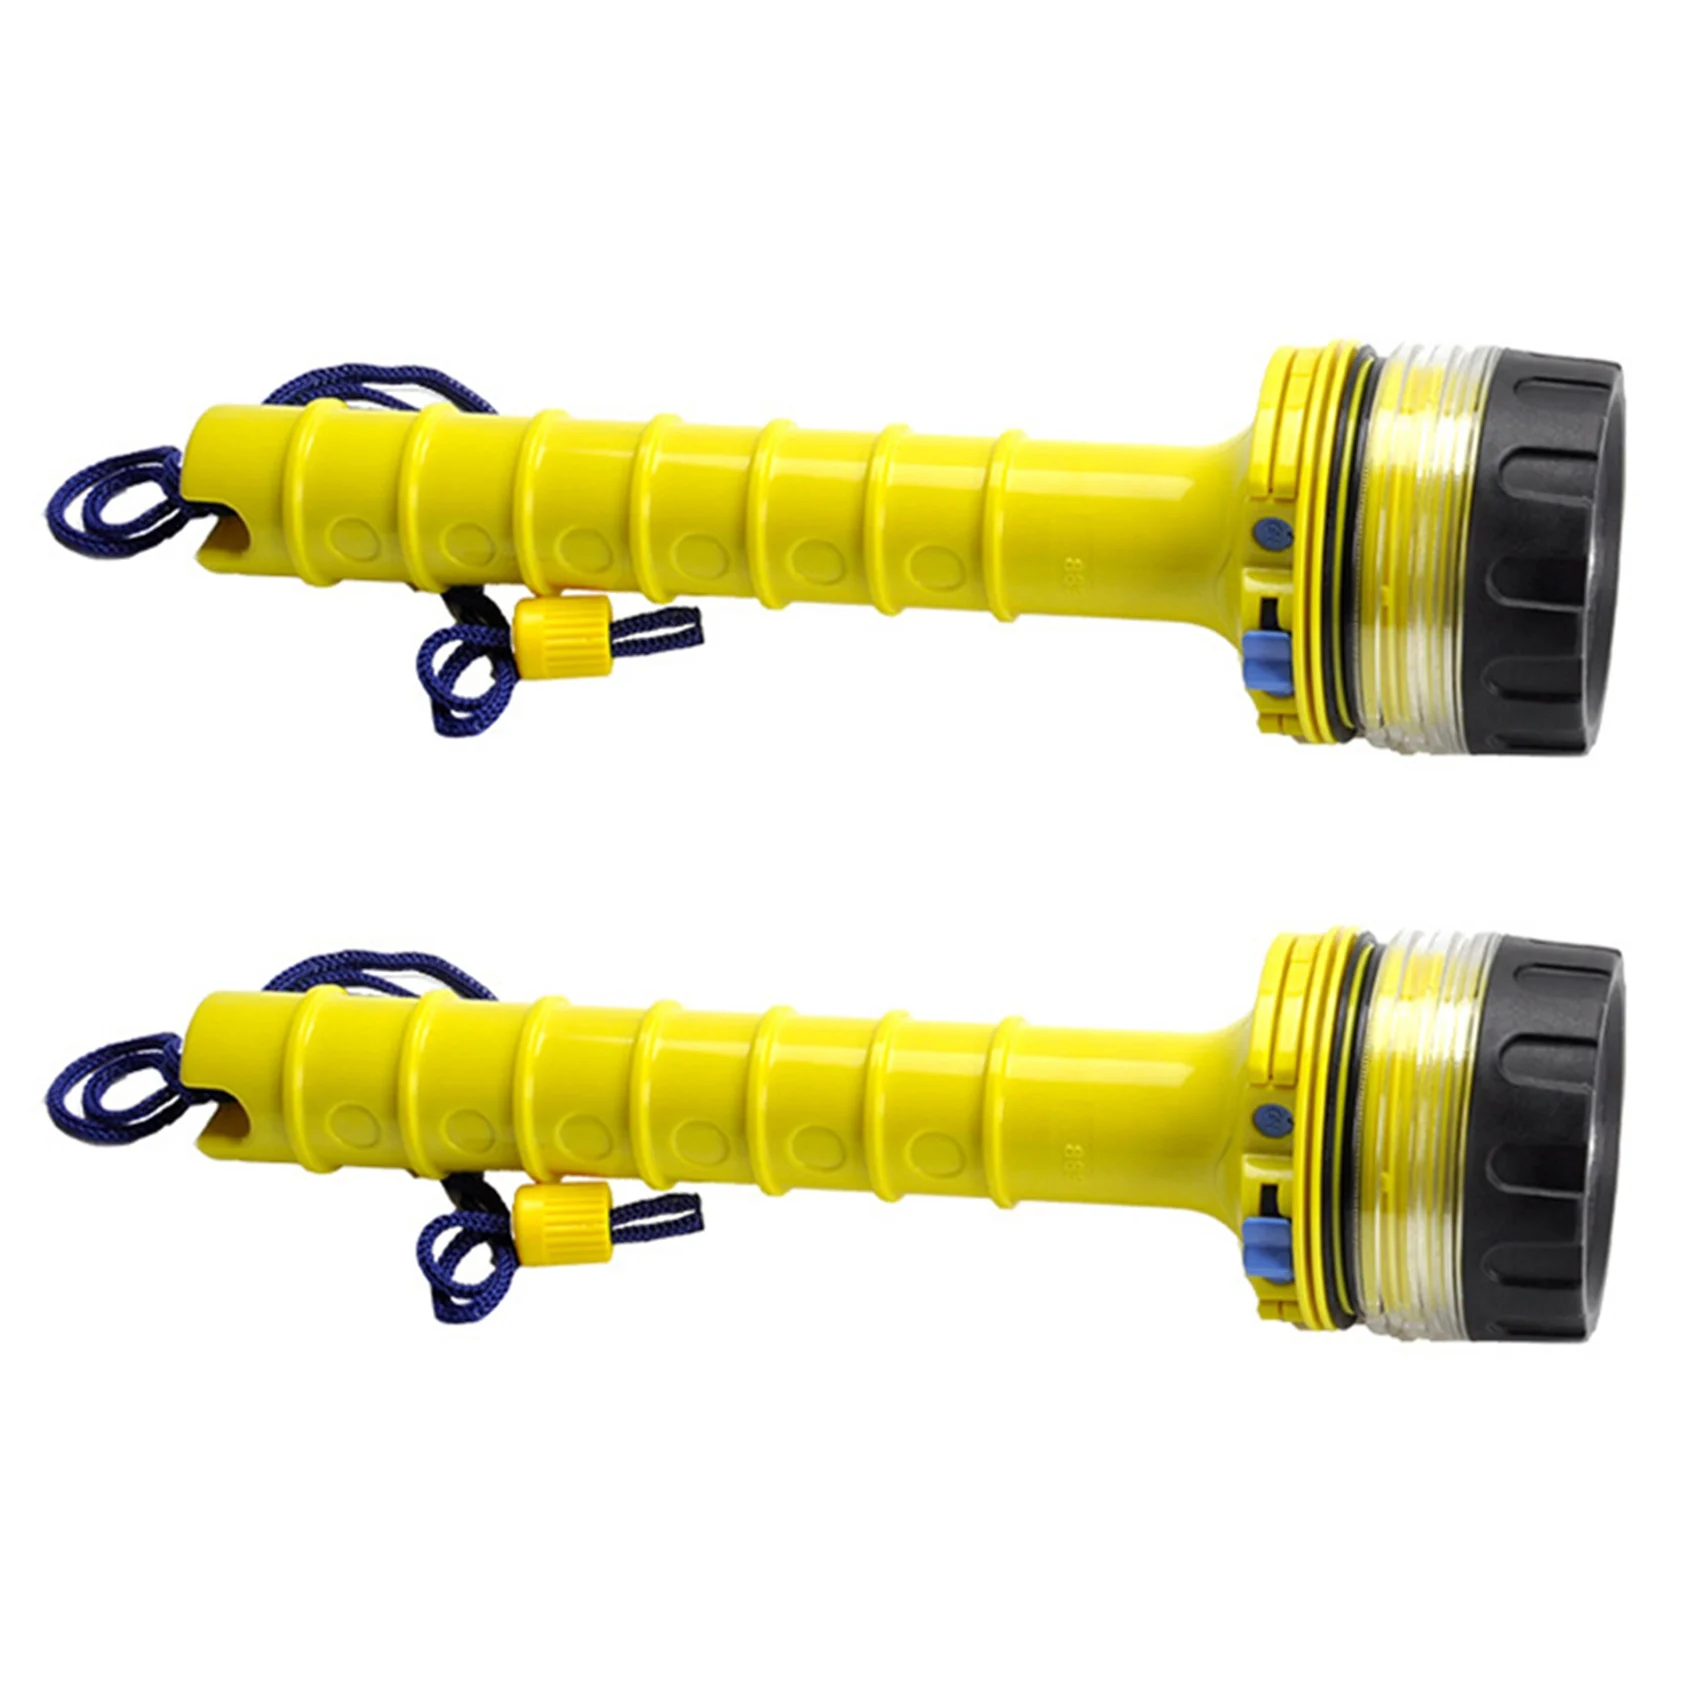 2X Scuba Diving Flashlight Underwater Waterproof LED Diver Light Spearfishing LED Diving Lamp